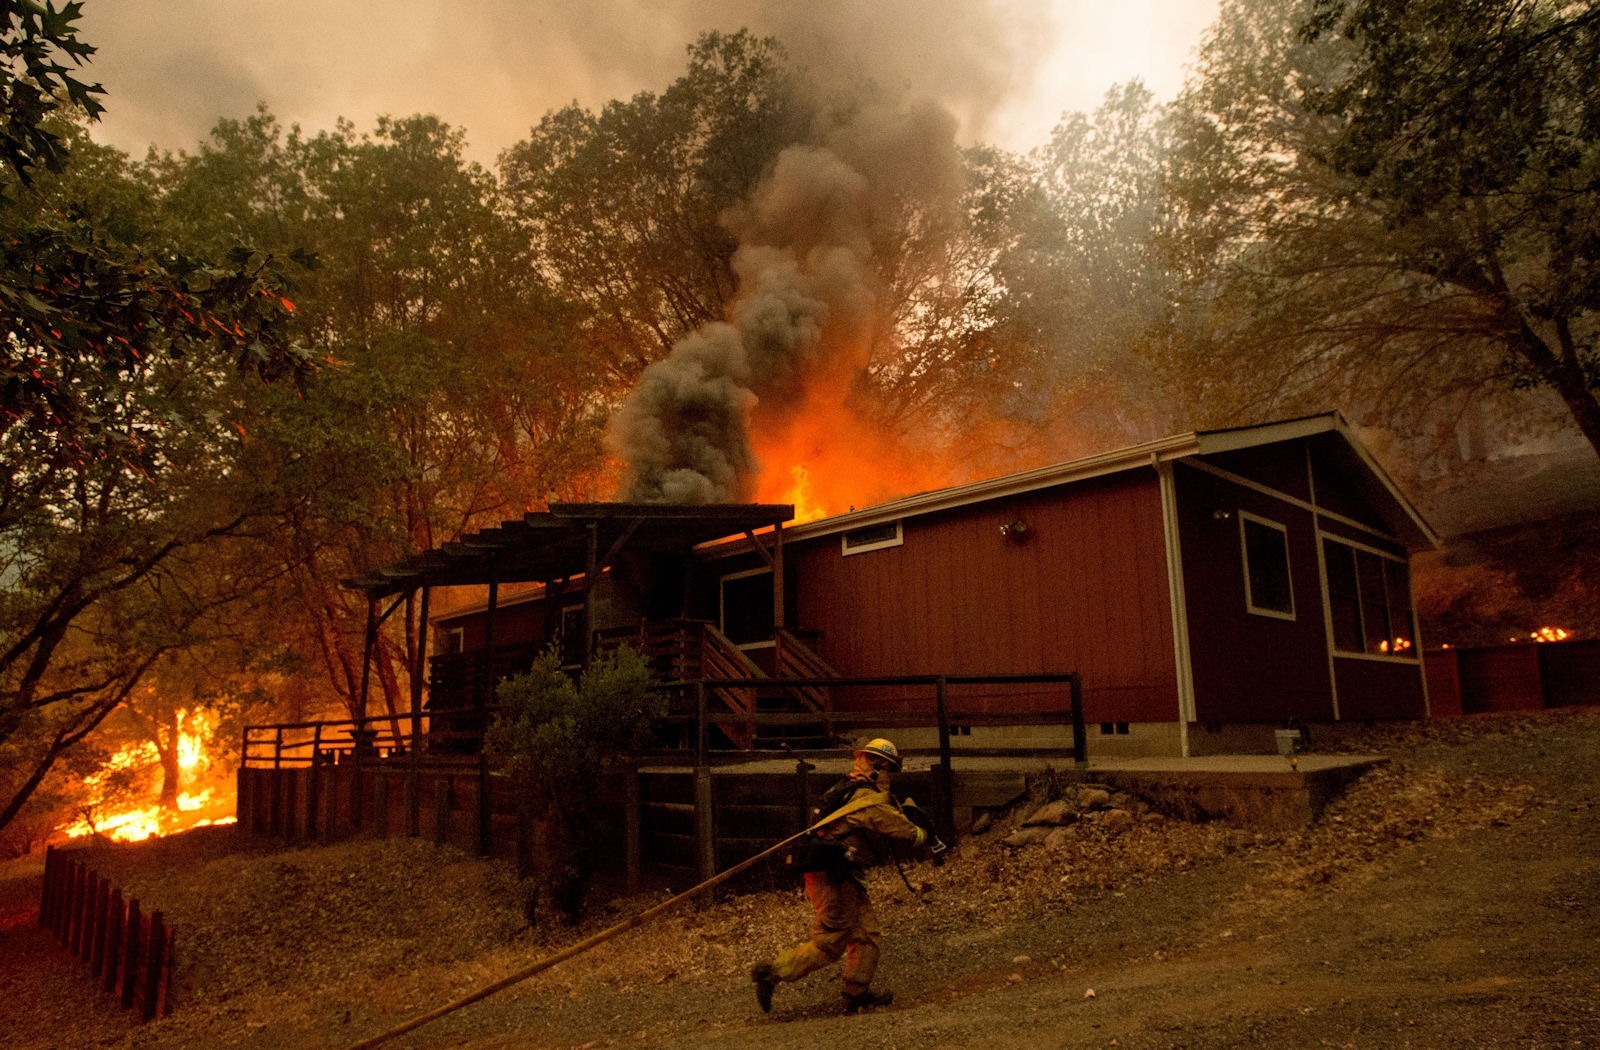 Wildfire Risk Report for every U.S. community